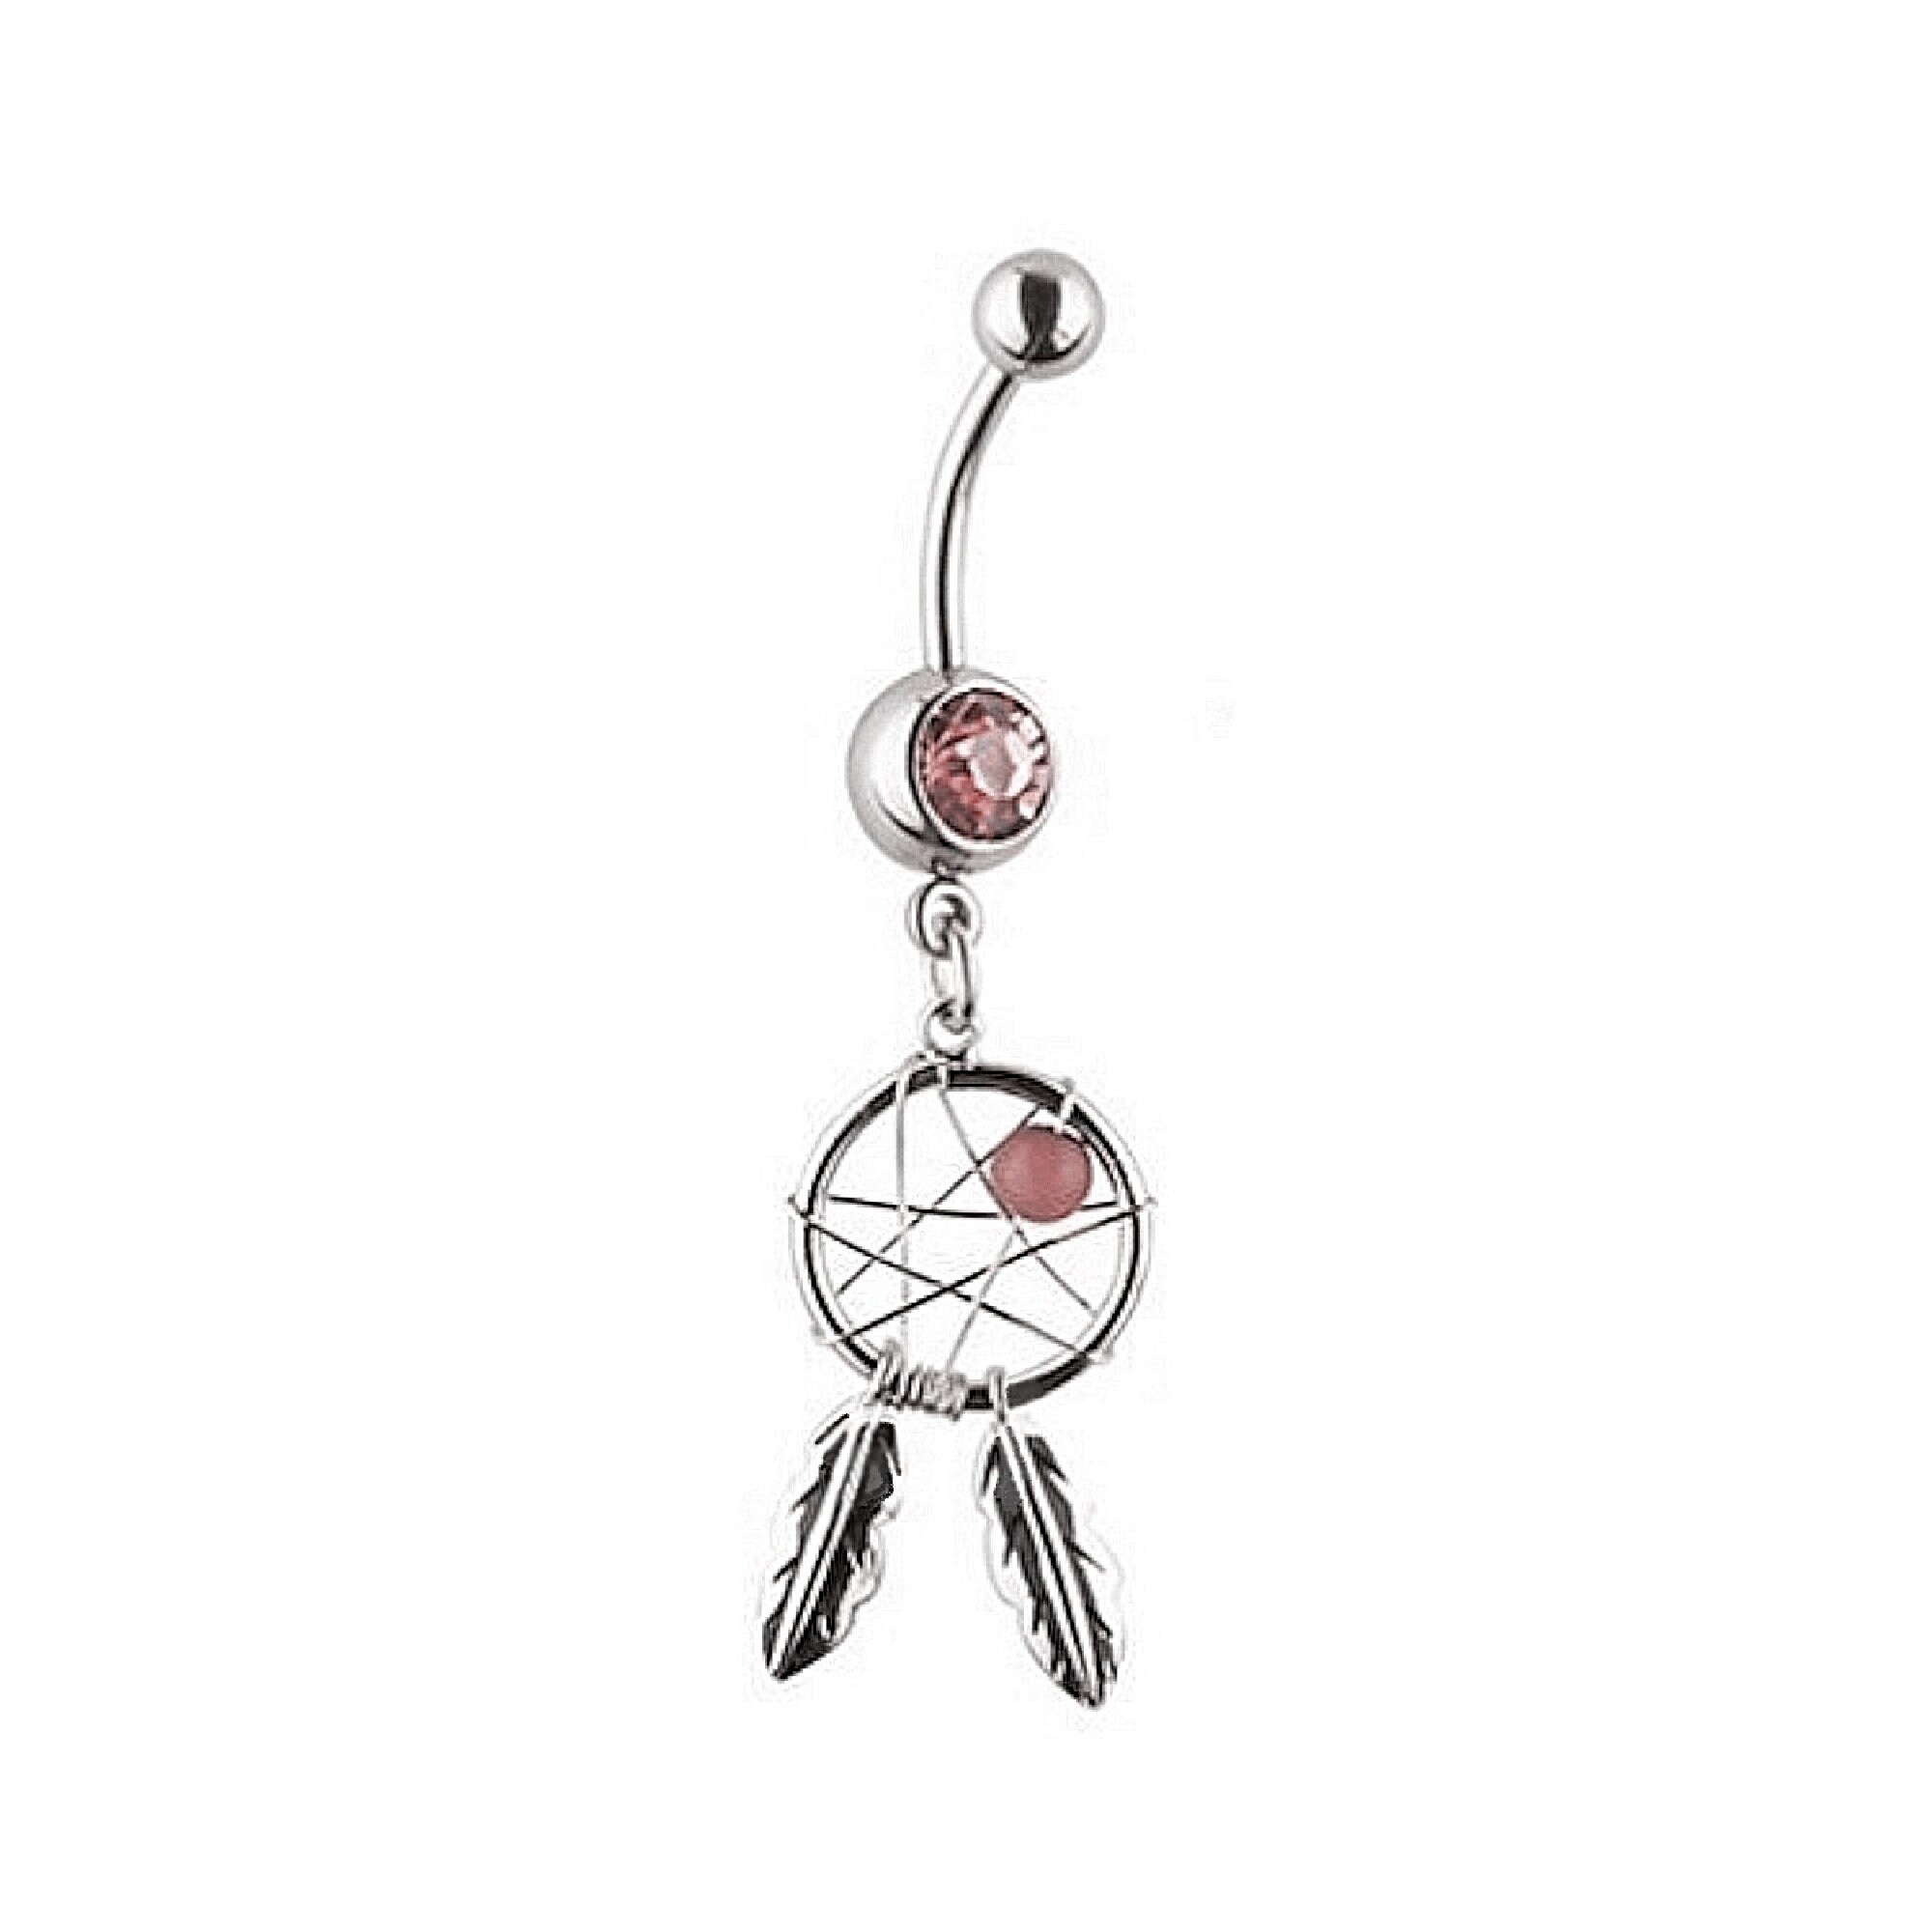 Dreamcatcher Dangle Belly Button Ring Pink CZ Gems Surgical Steel 316L 14g